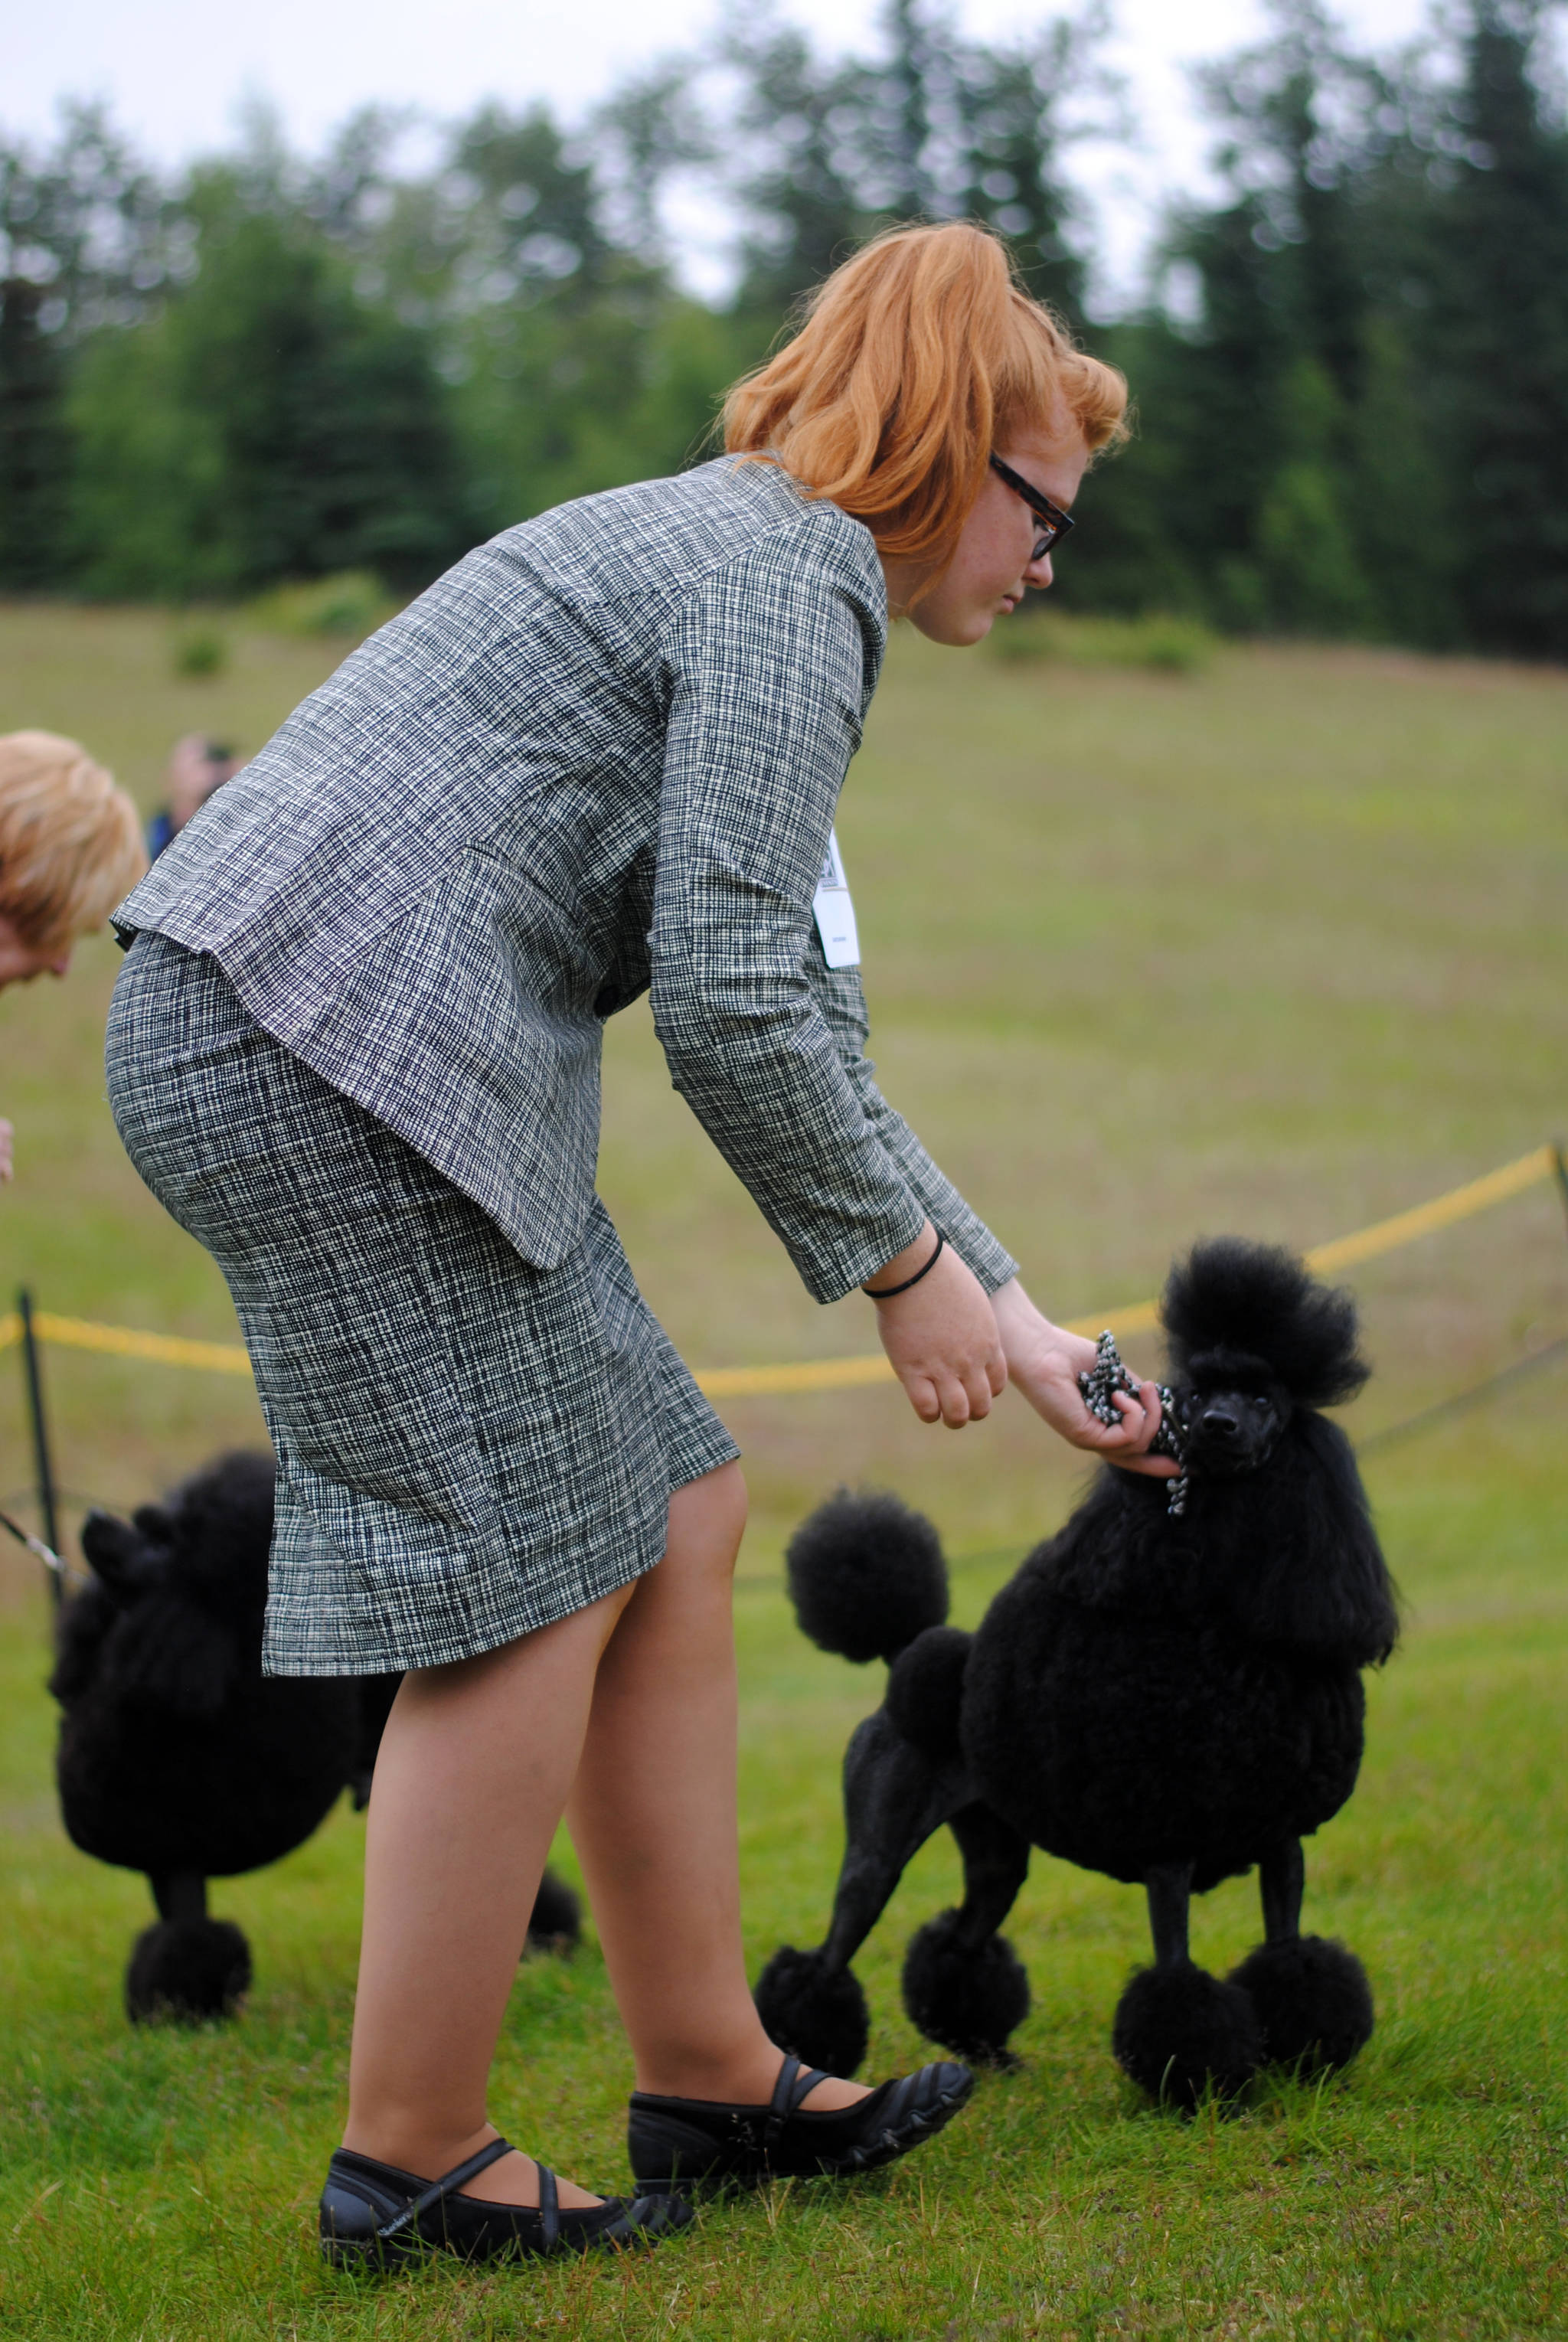 Shadow, a poodle owned by Melody Newberry of Funny River, is handled by Lindsey Pabst of Kenai at the Kenai Kennel Club dog show Saturday, July 15, 2017 at Skyview Middle School in Soldotna, Alaska. (Photo by Kat Sorensen/Peninsula Clarion)